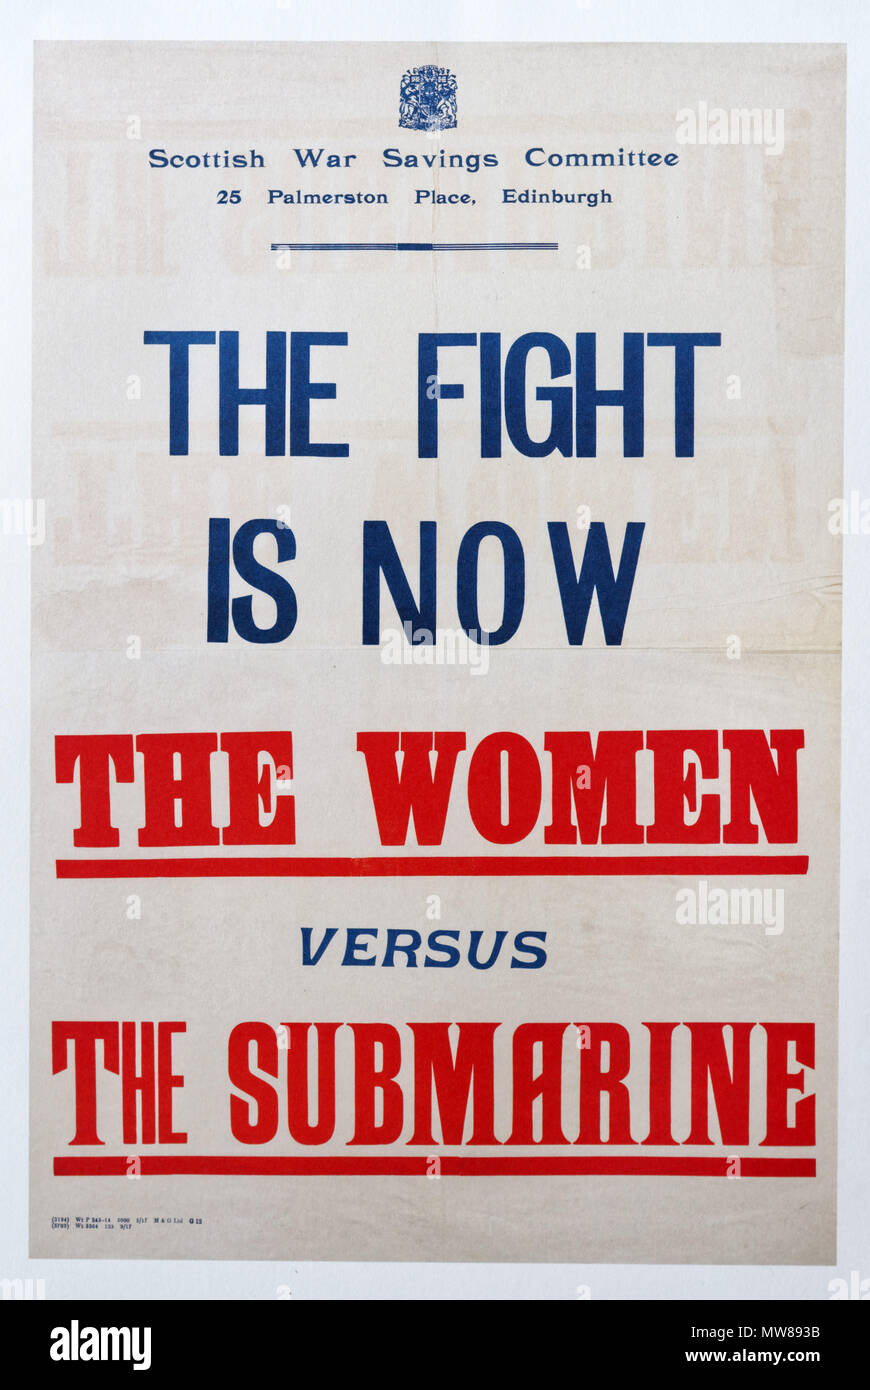 A British first world war poster promoting that the fight between women and submarines, encouraging women to avoid wasting food to counter the German  Stock Photo